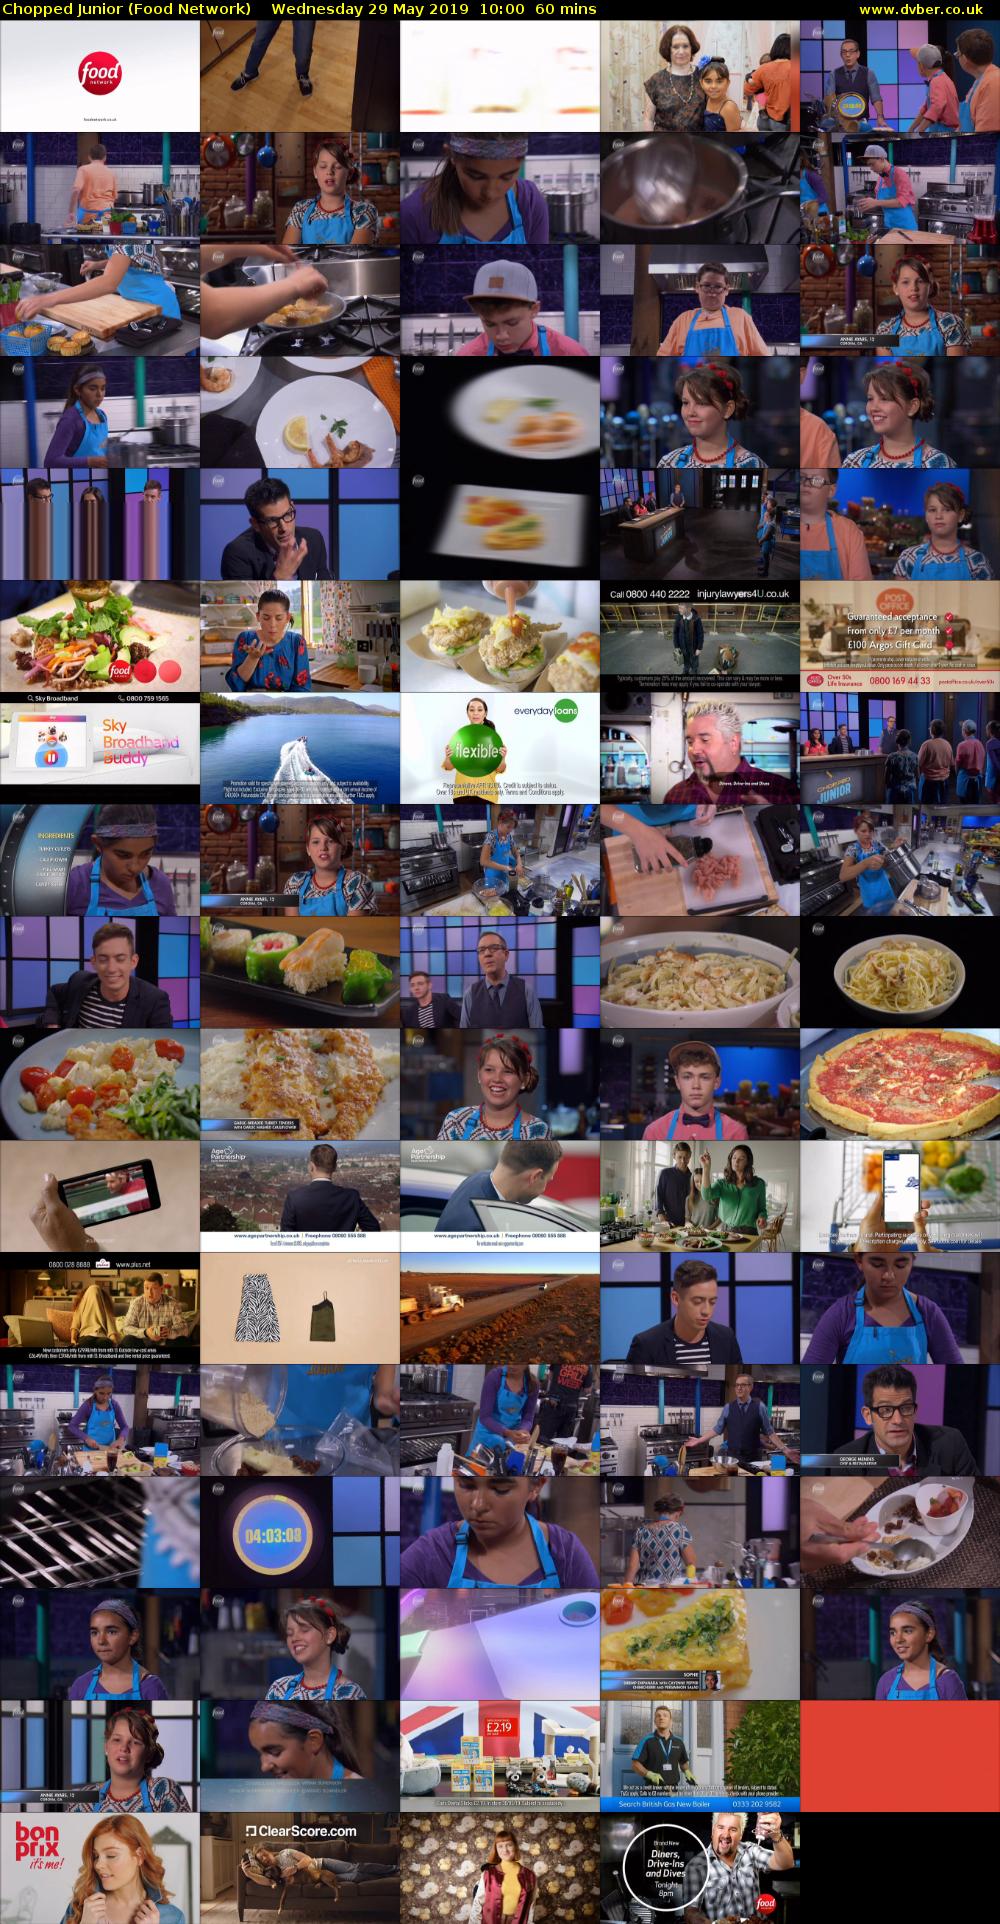 Chopped Junior (Food Network) Wednesday 29 May 2019 10:00 - 11:00